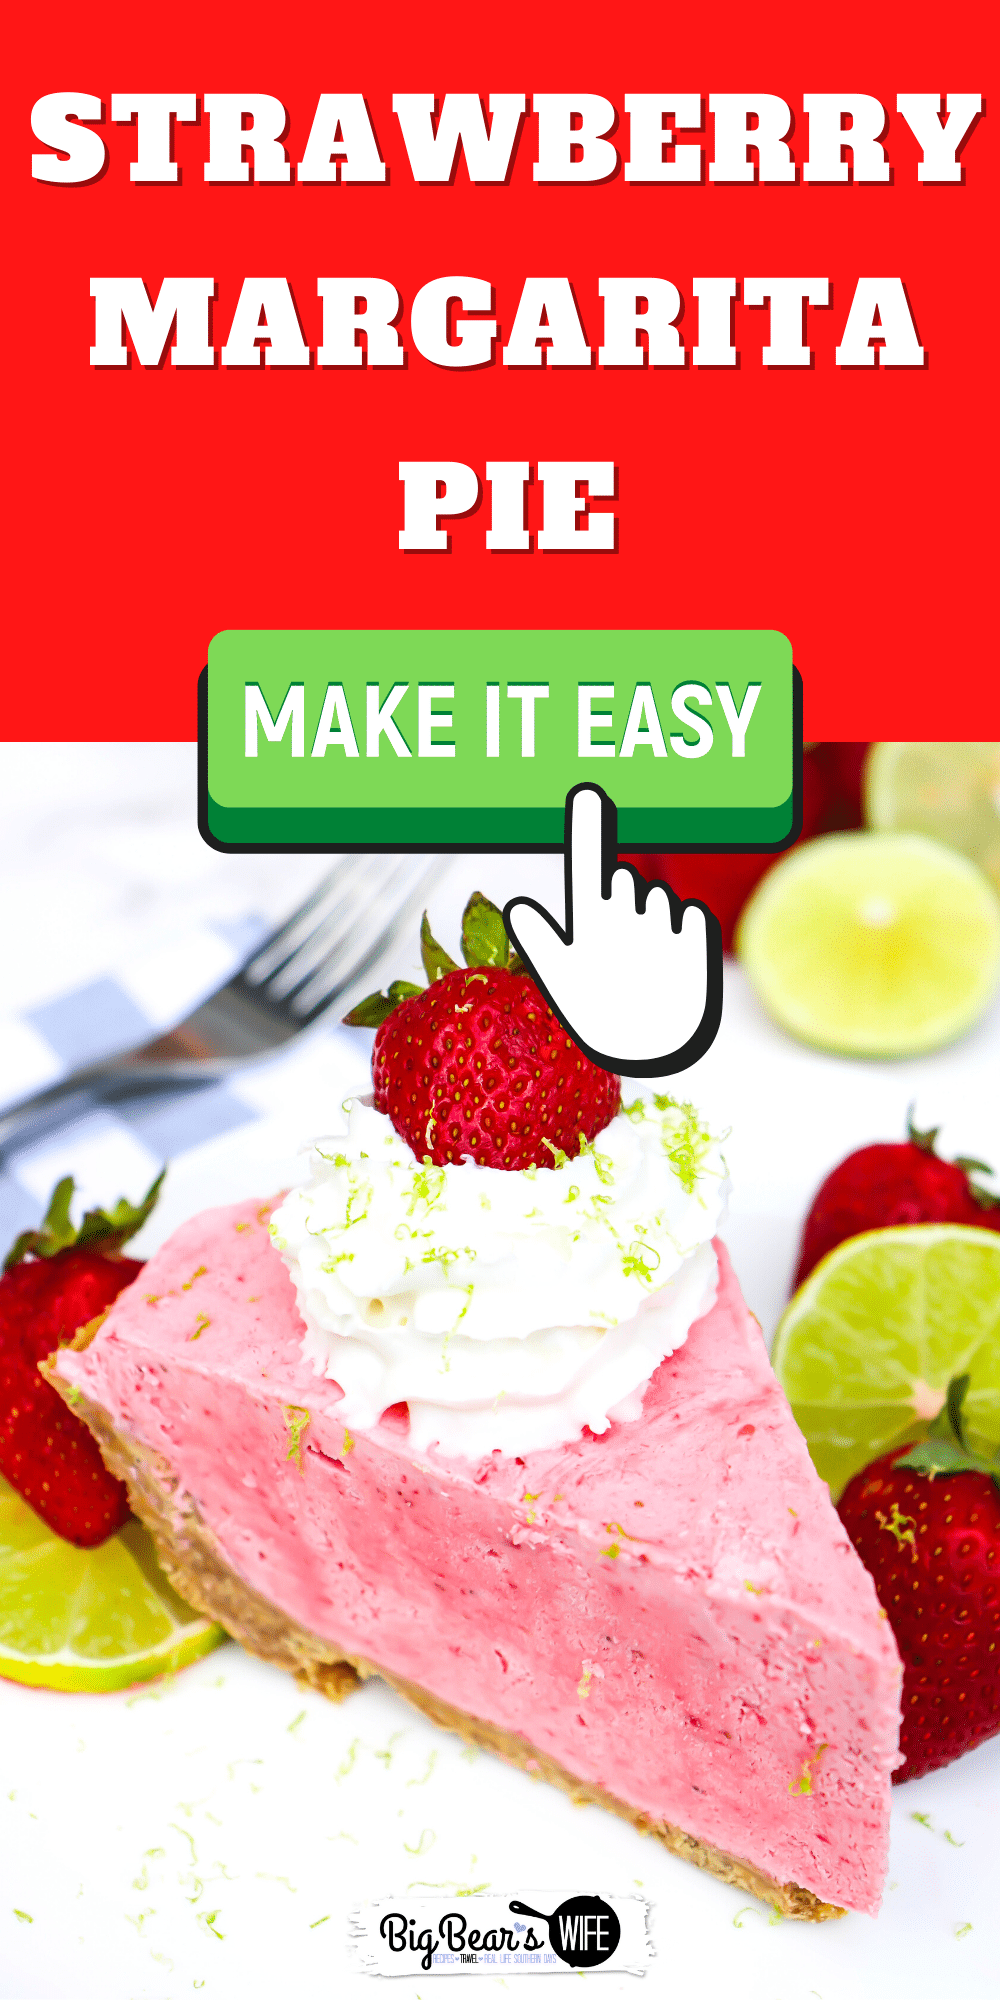 Need a treat to cool you down? Try this easy Strawberry Margarita Pie. A homemade no-bake dessert with all the flavors of a frozen strawberry margarita (without the hangover).  via @bigbearswife